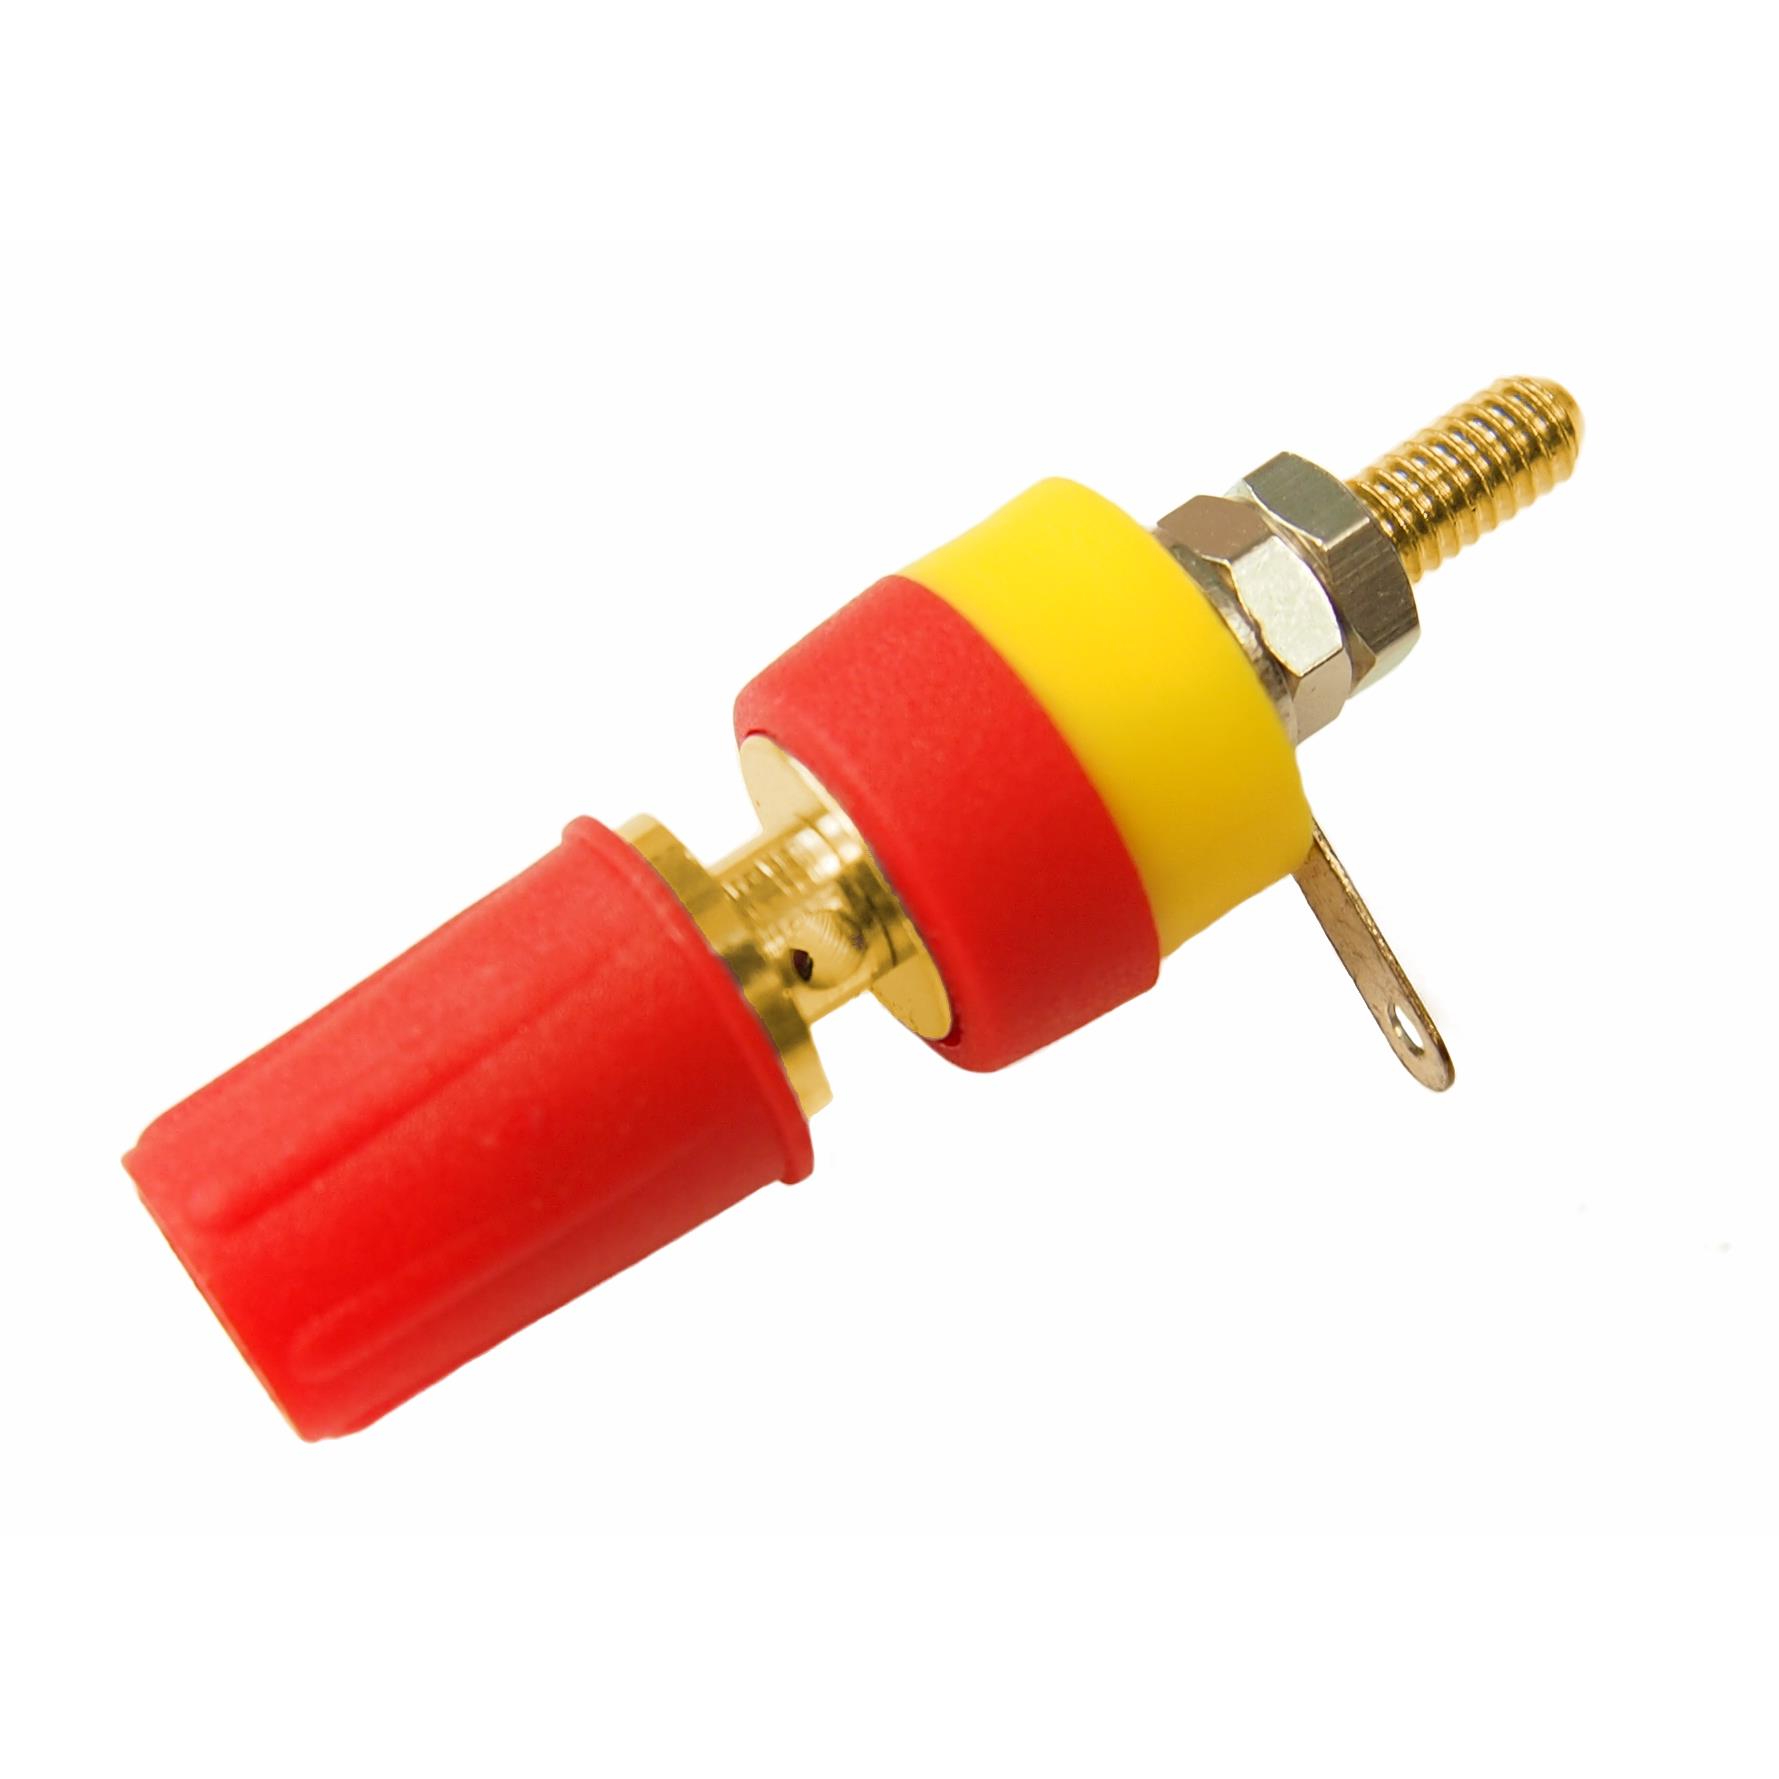 【CL15511A】TERMINAL TP2 RED GOLD